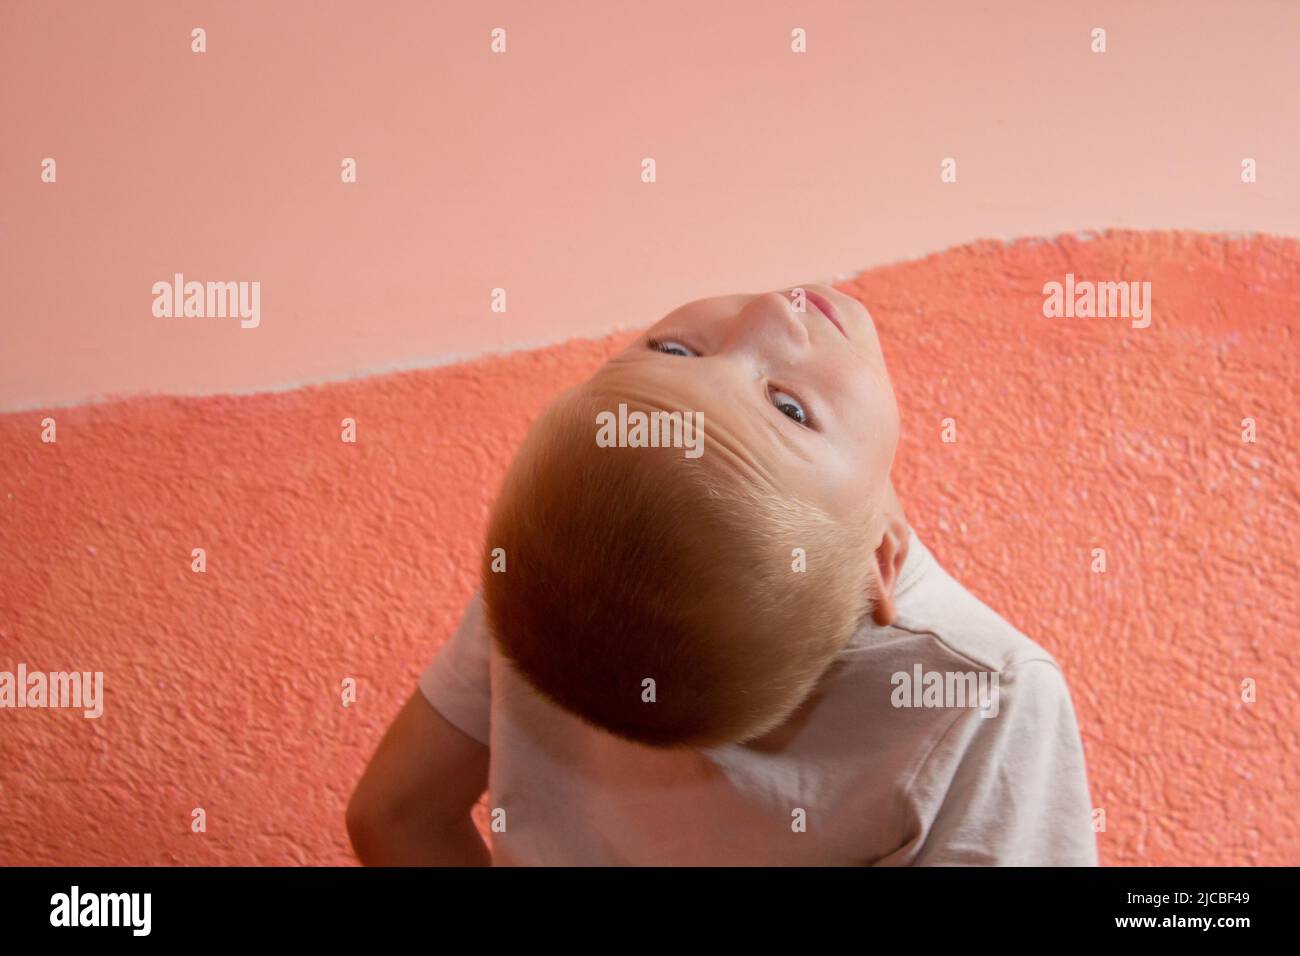 child turned his head to the back and looks up Stock Photo